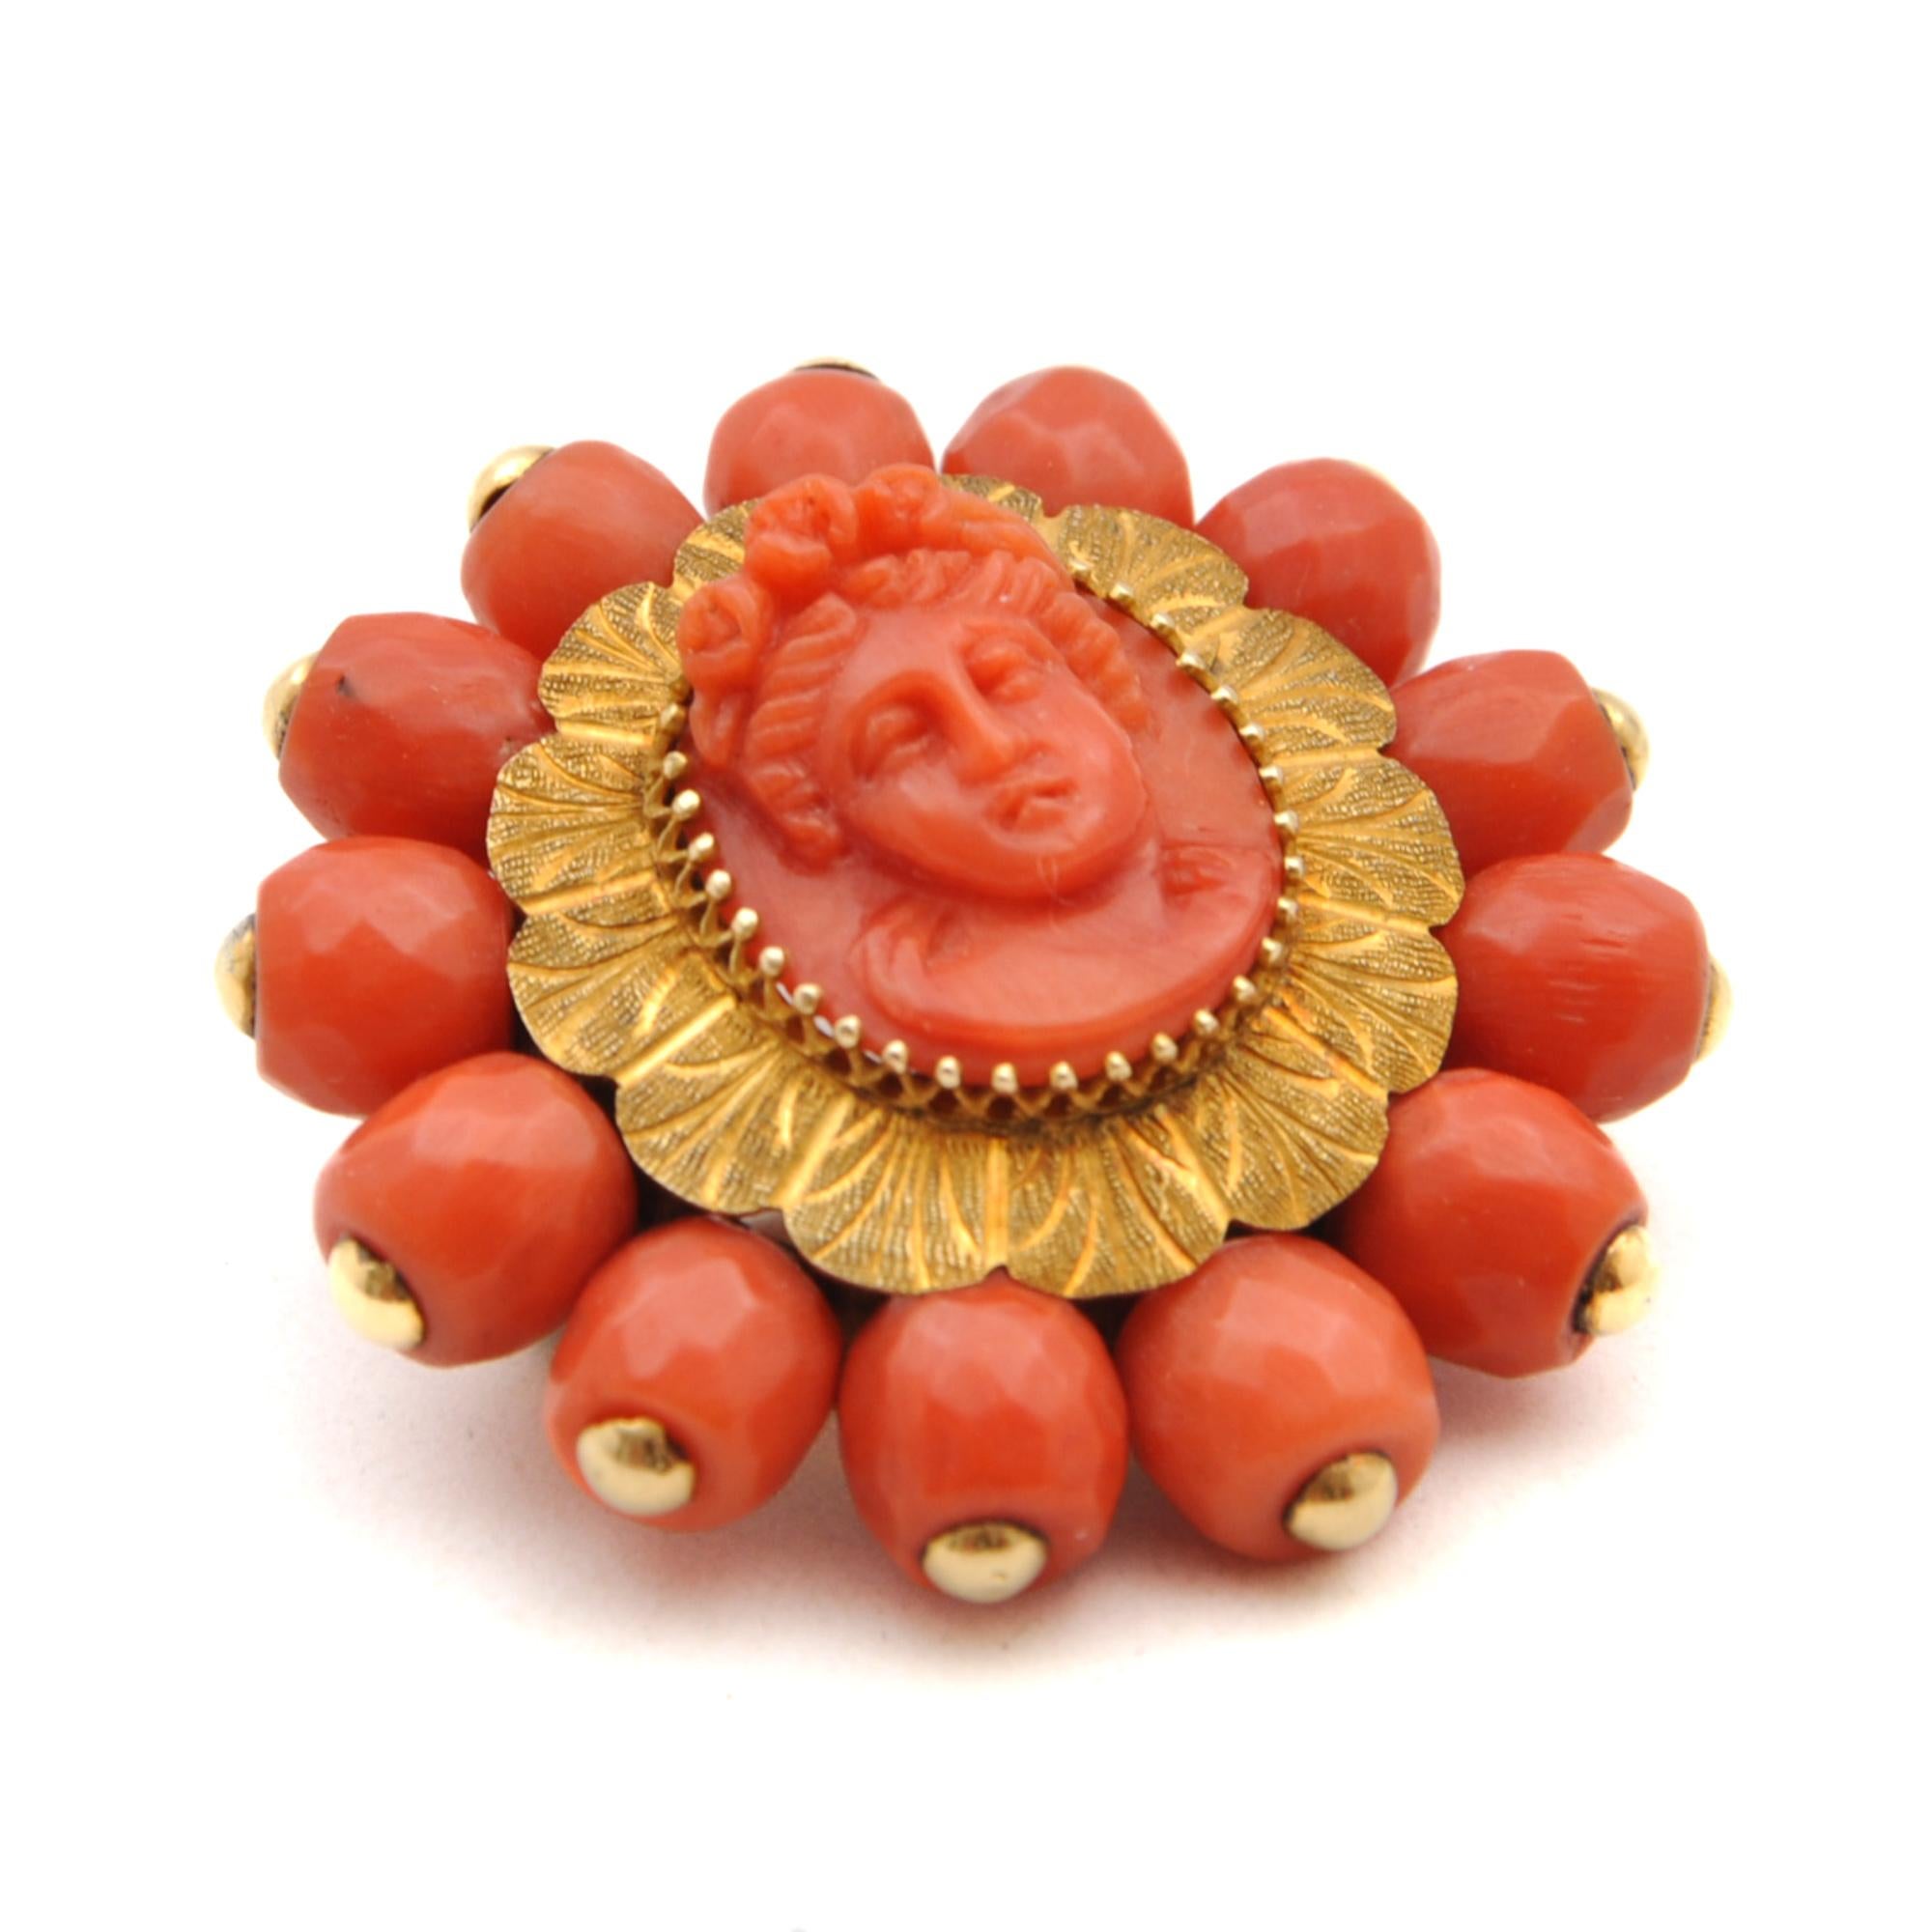 Mixed Cut Antique Victorian Carved Coral Cameo and Gold Brooch For Sale